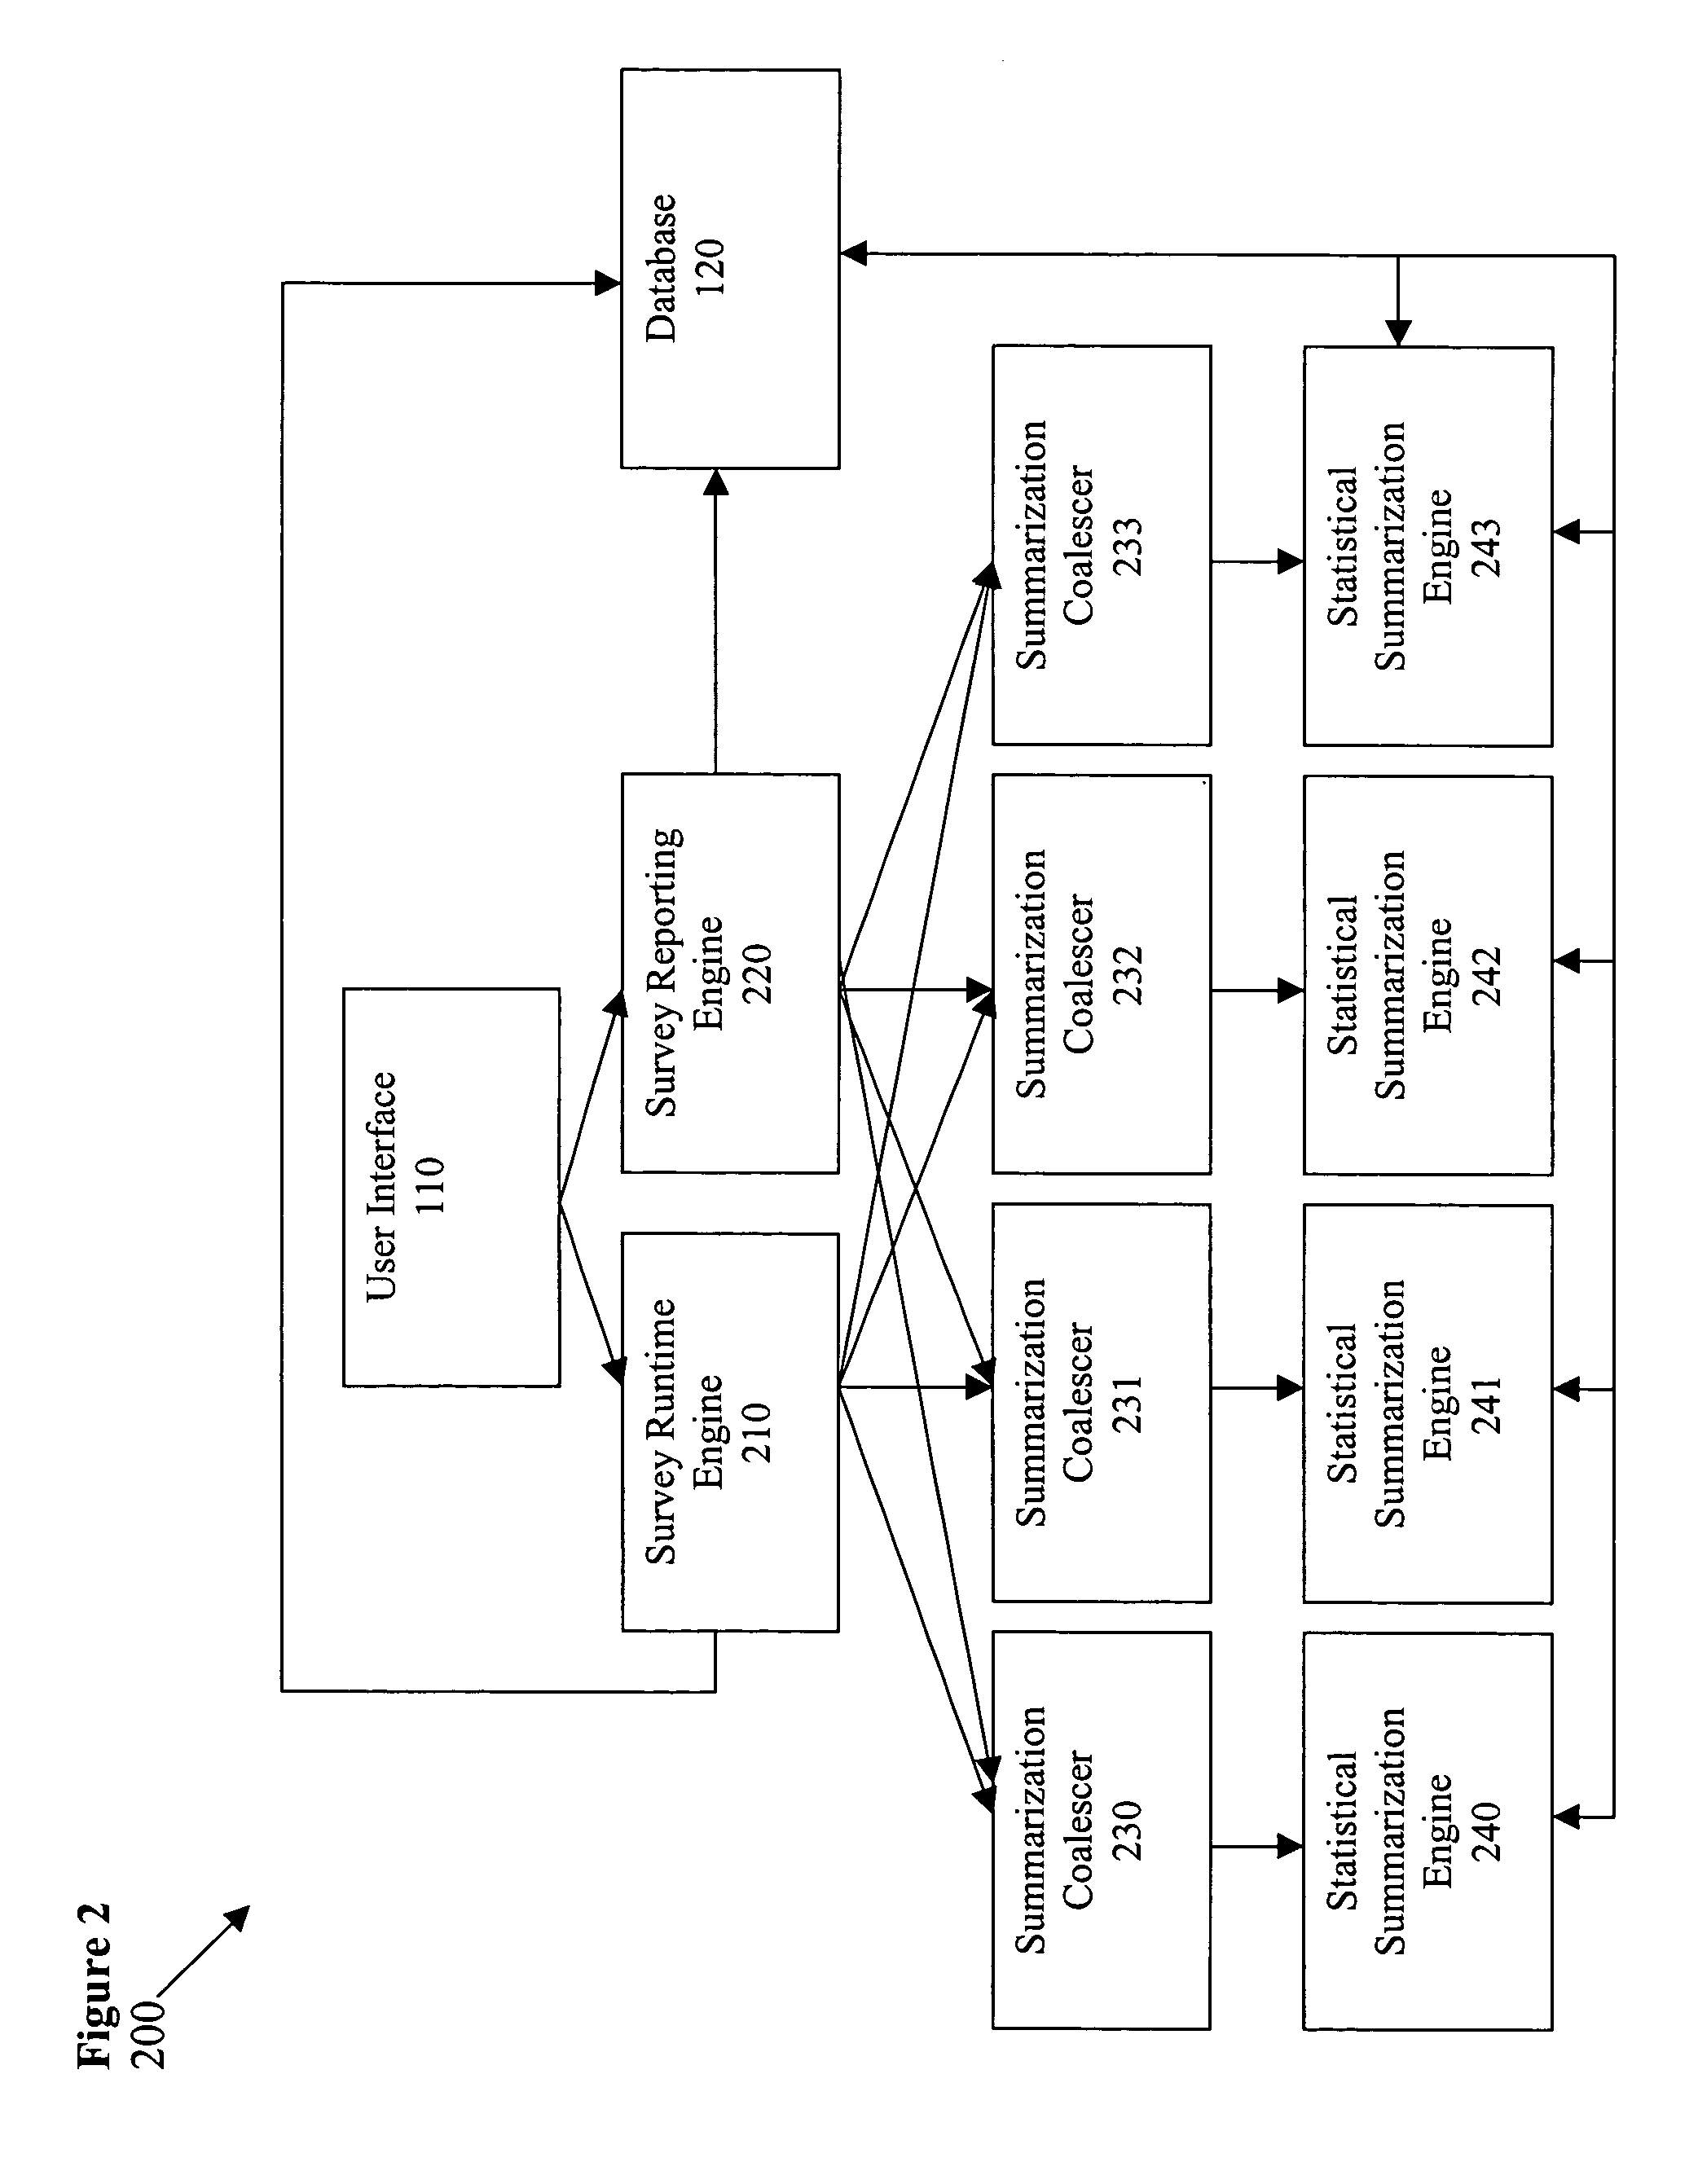 Method and apparatus for survey processing